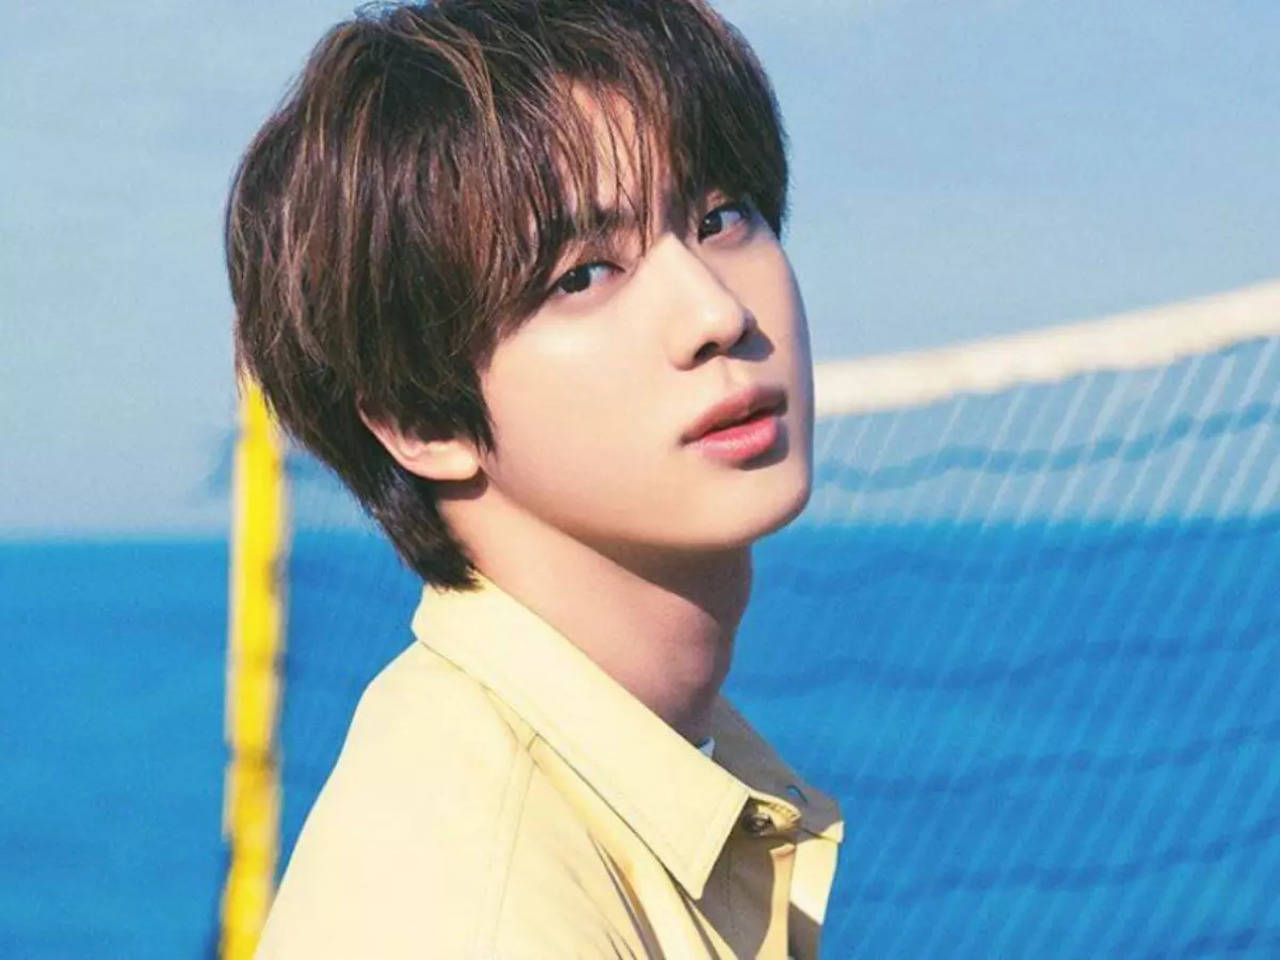 Bts' Jin To Have Limited Performance In Upcoming La Concerts After Surgery,  Army Reacts 'His Health Is More Important' | K-Pop Movie News - Times Of  India